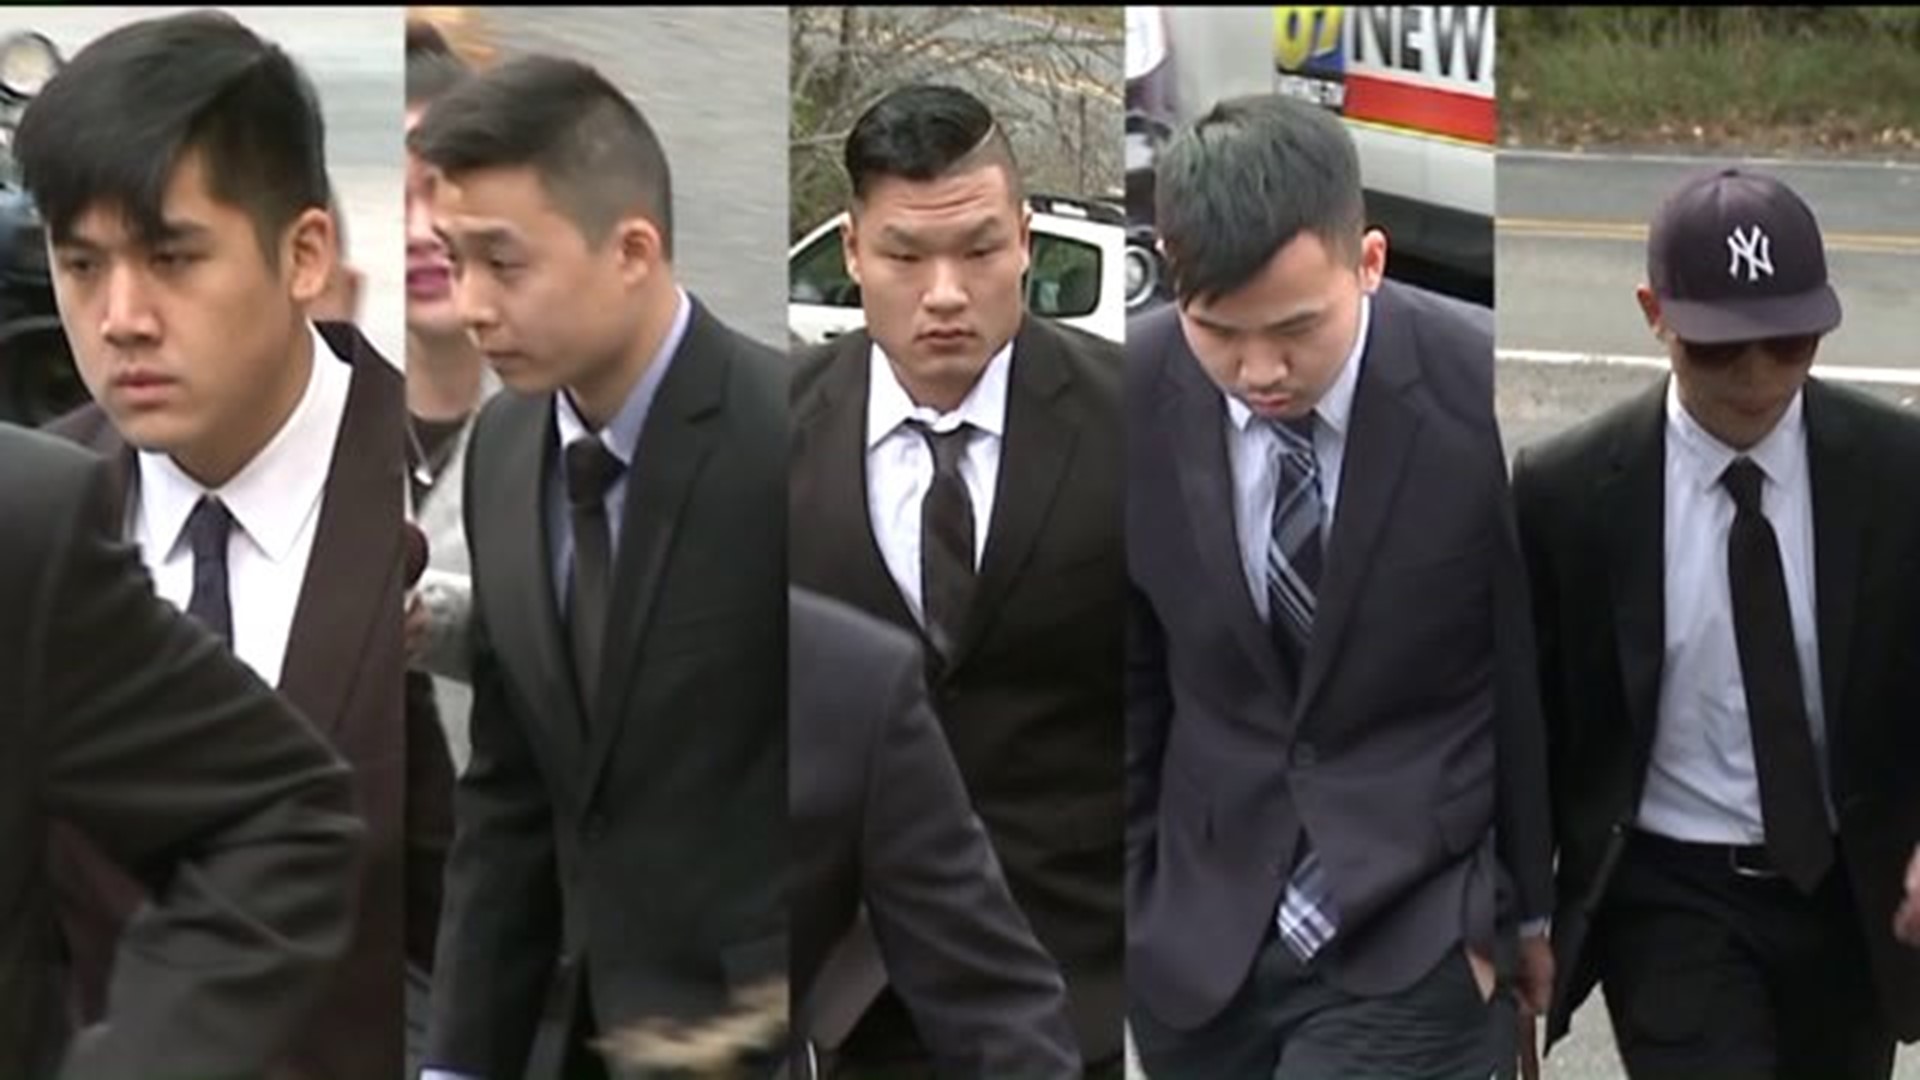 Fraternity President Testifies against Brothers Charged with Murder